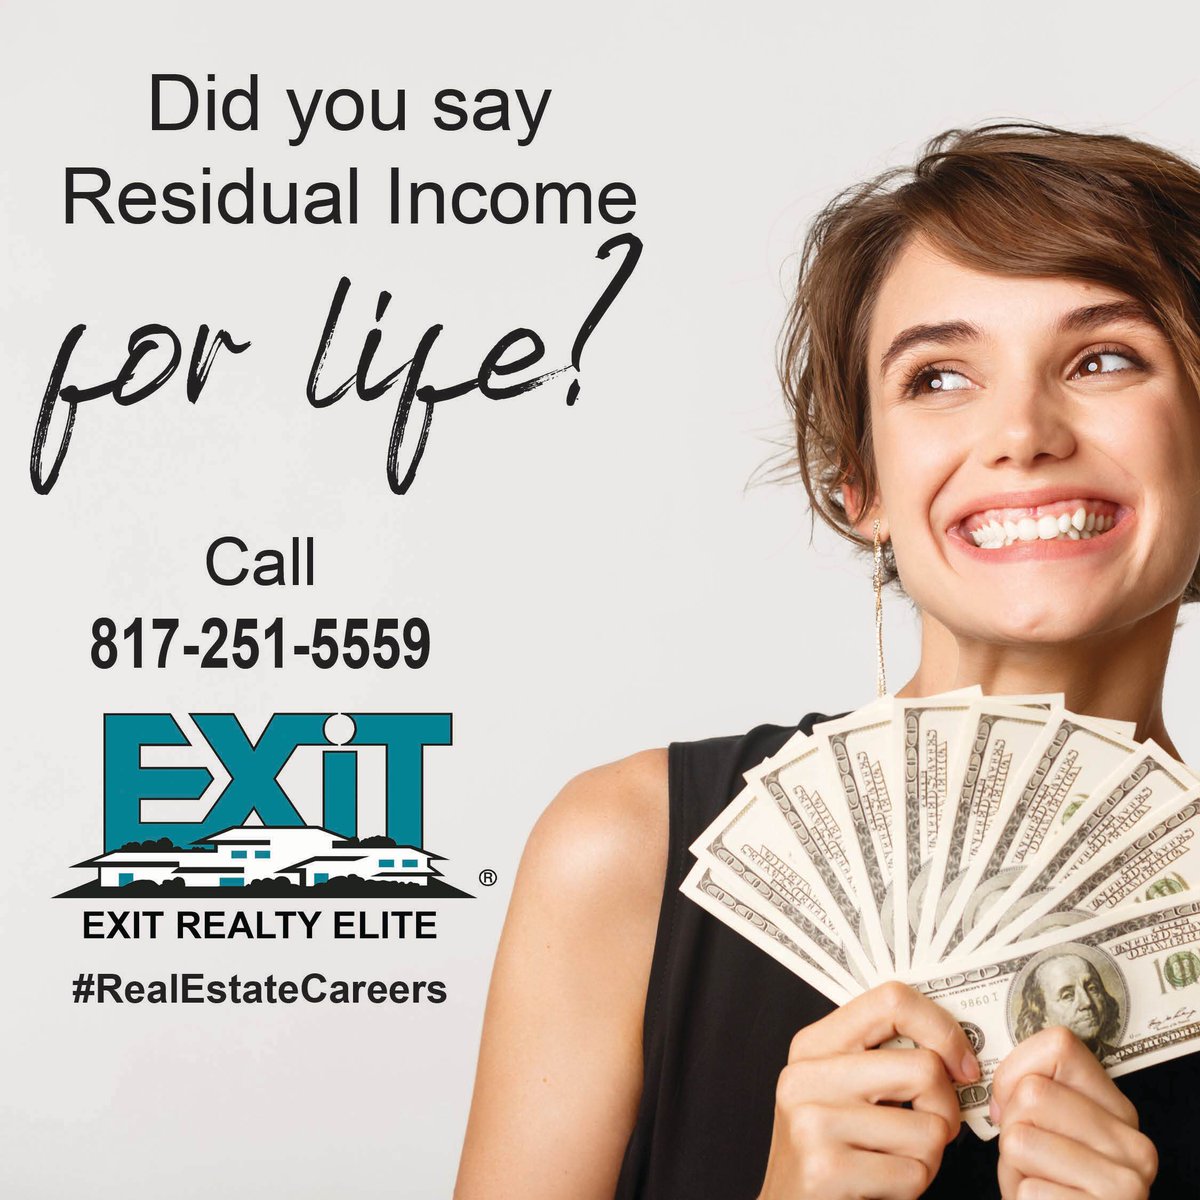 Residual income for life? It's true! Call us to find out how.

#LOVEXIT #ImSold #ThinkSmartThinkEXIT #RealEstateReinvented #ListwithEXIT #DFWMetroplex #buyahome #sellahome #EXITRealtyElite #RealEstateCareers #TexasRealEstate